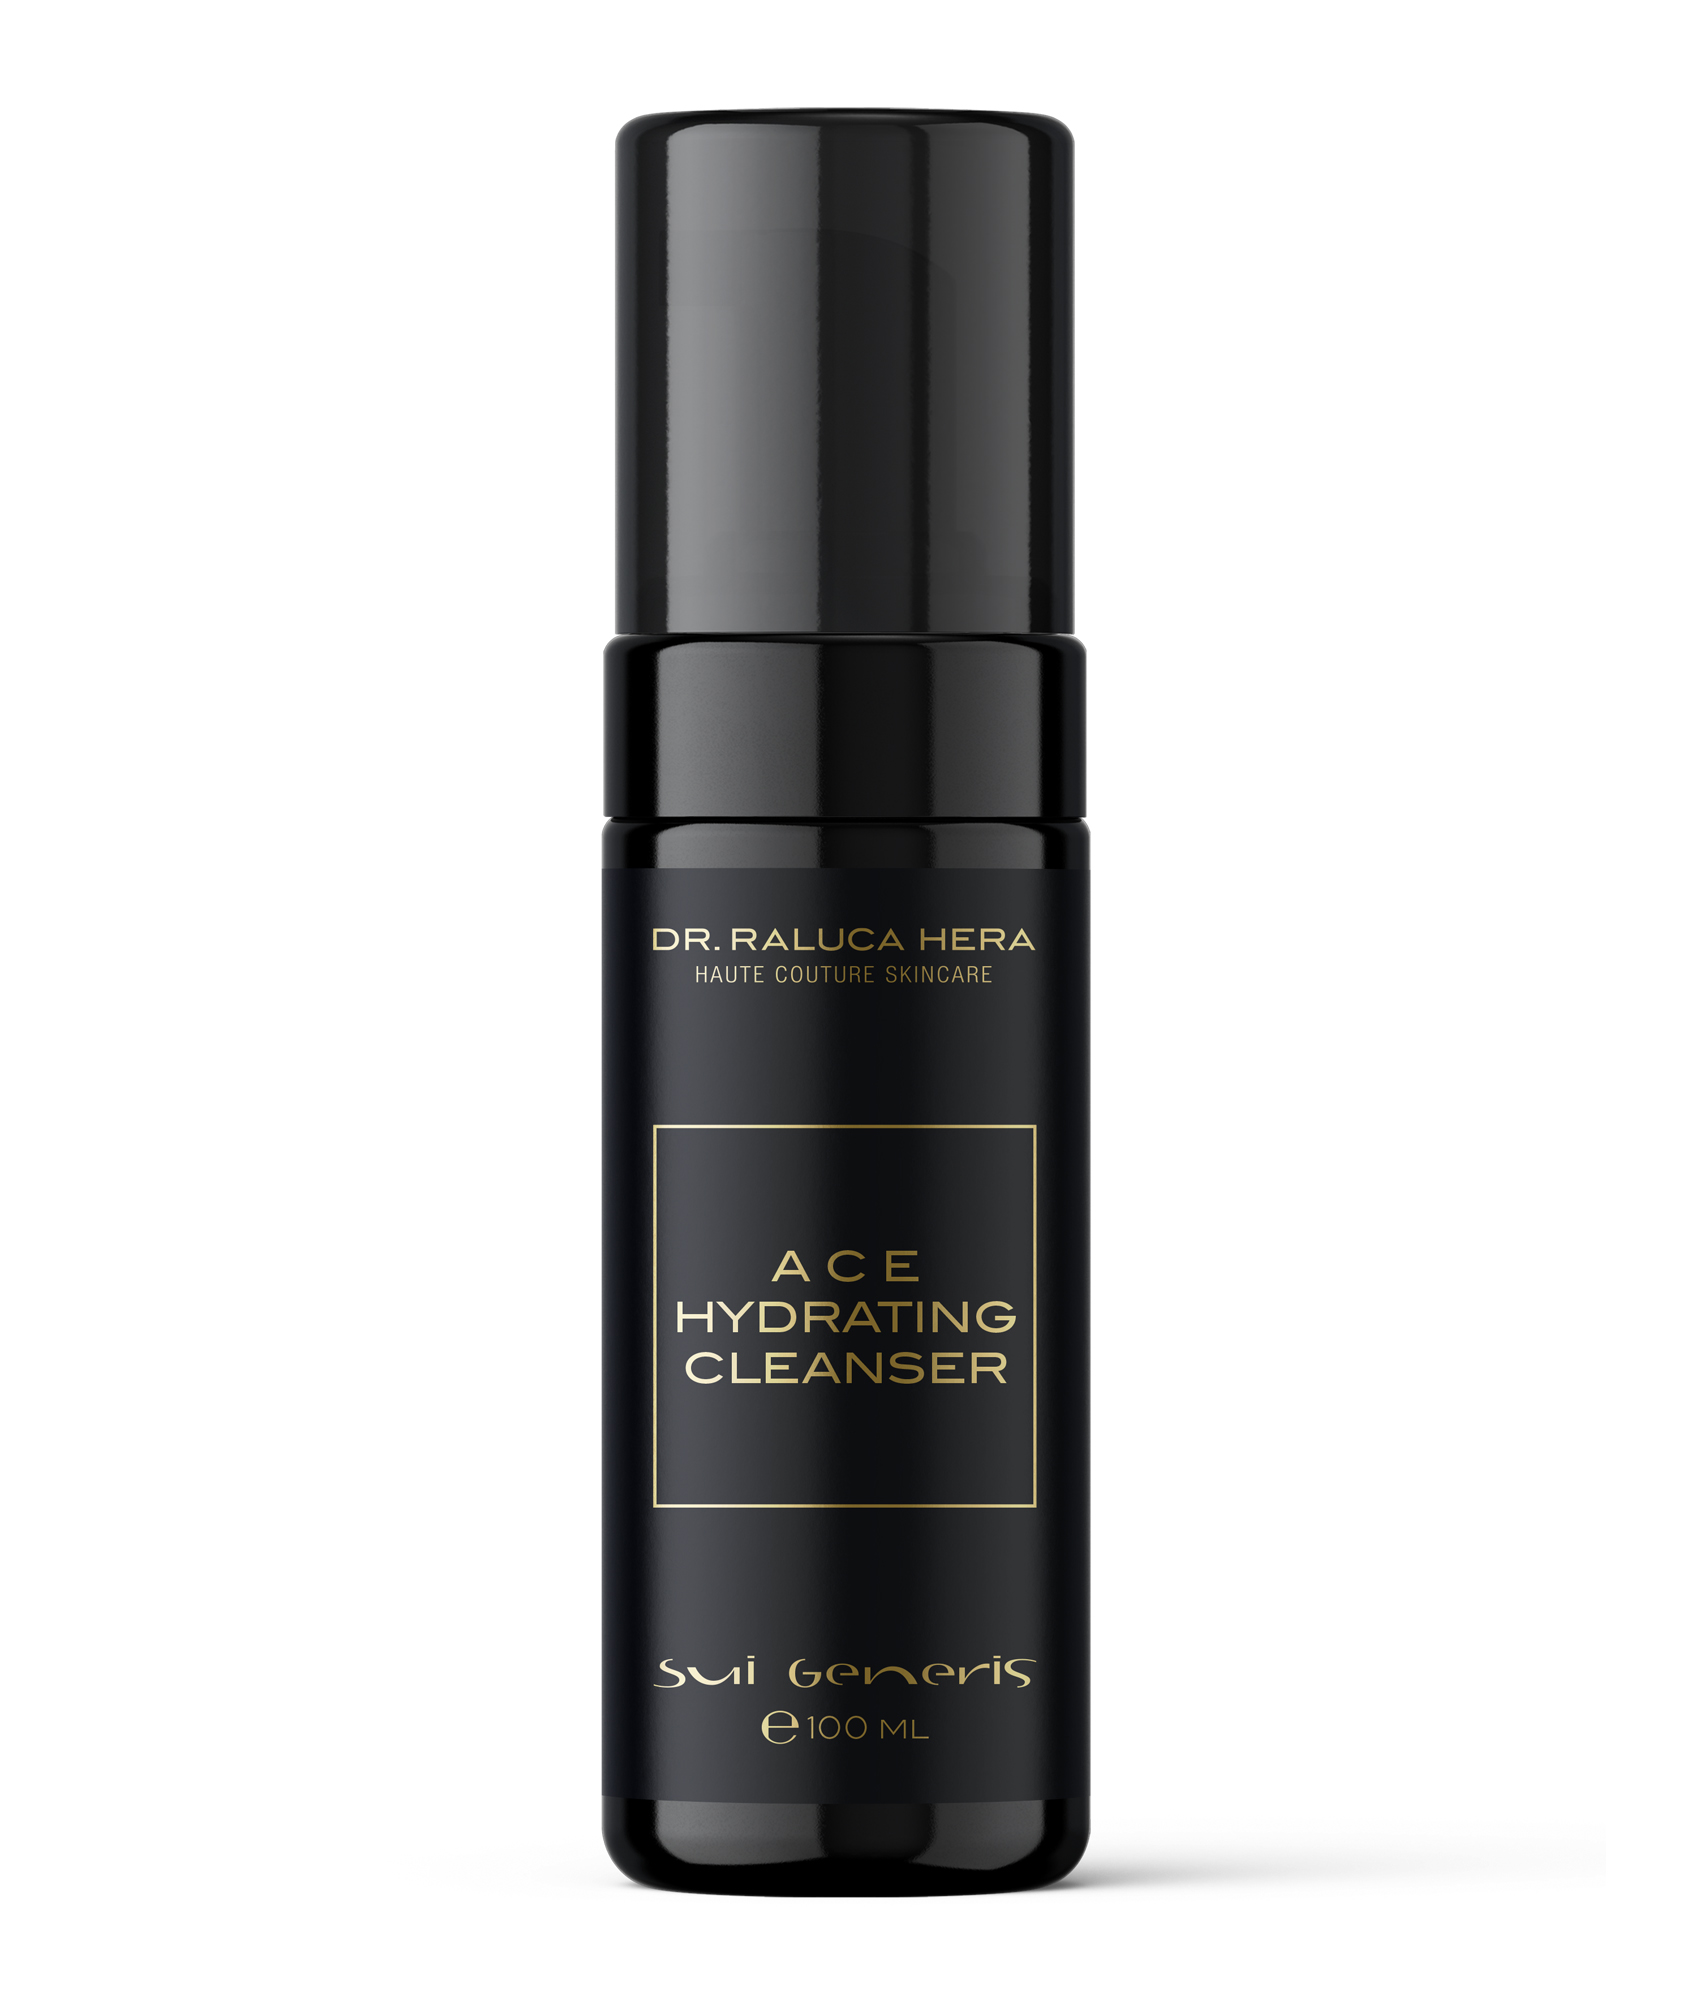 A C E HYDRATING CLEANSER